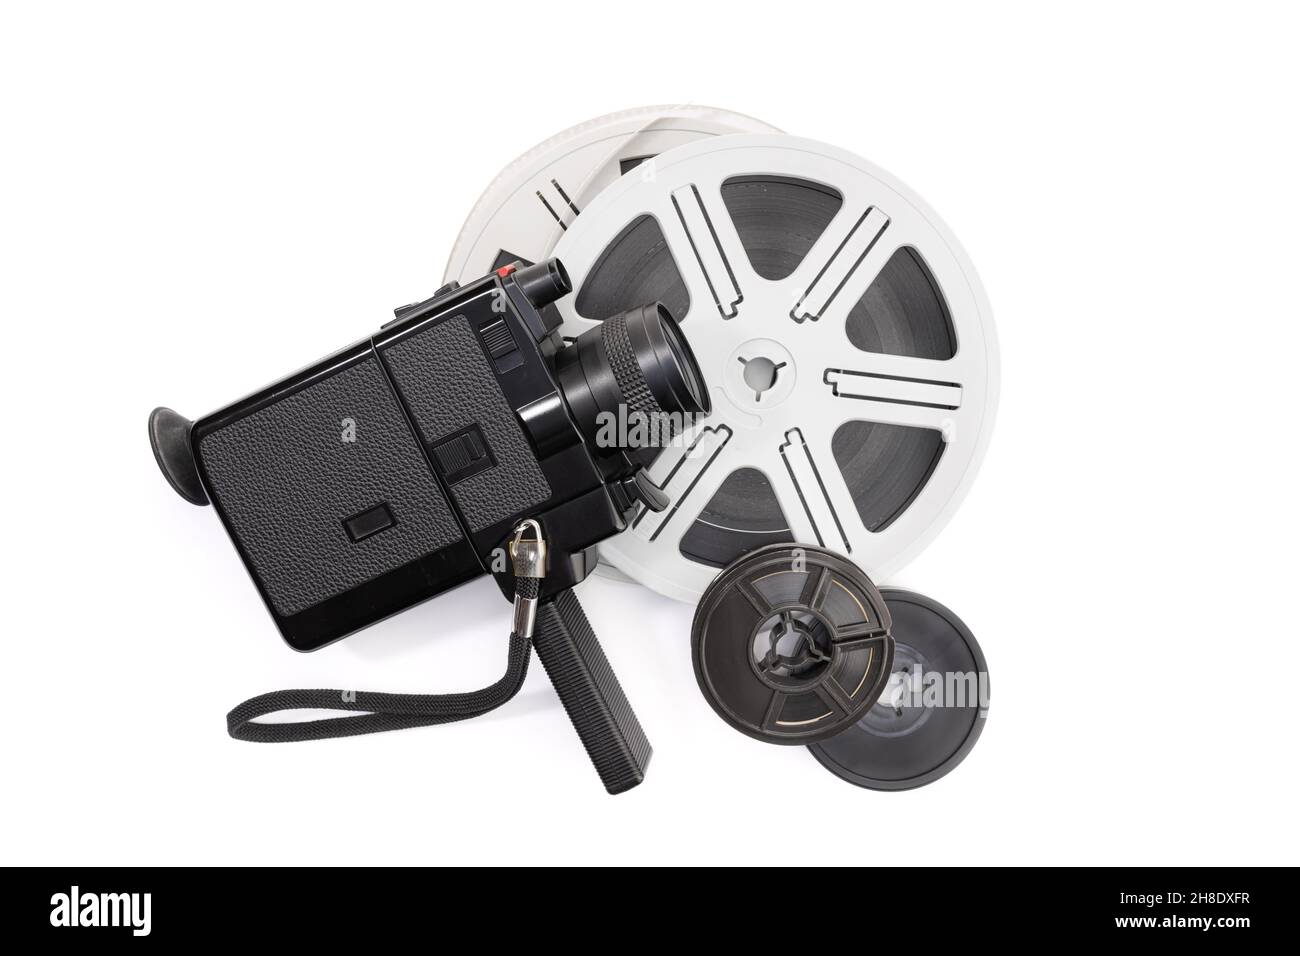 Super 8 camera and film reels isolated on white background. Copy space Stock Photo